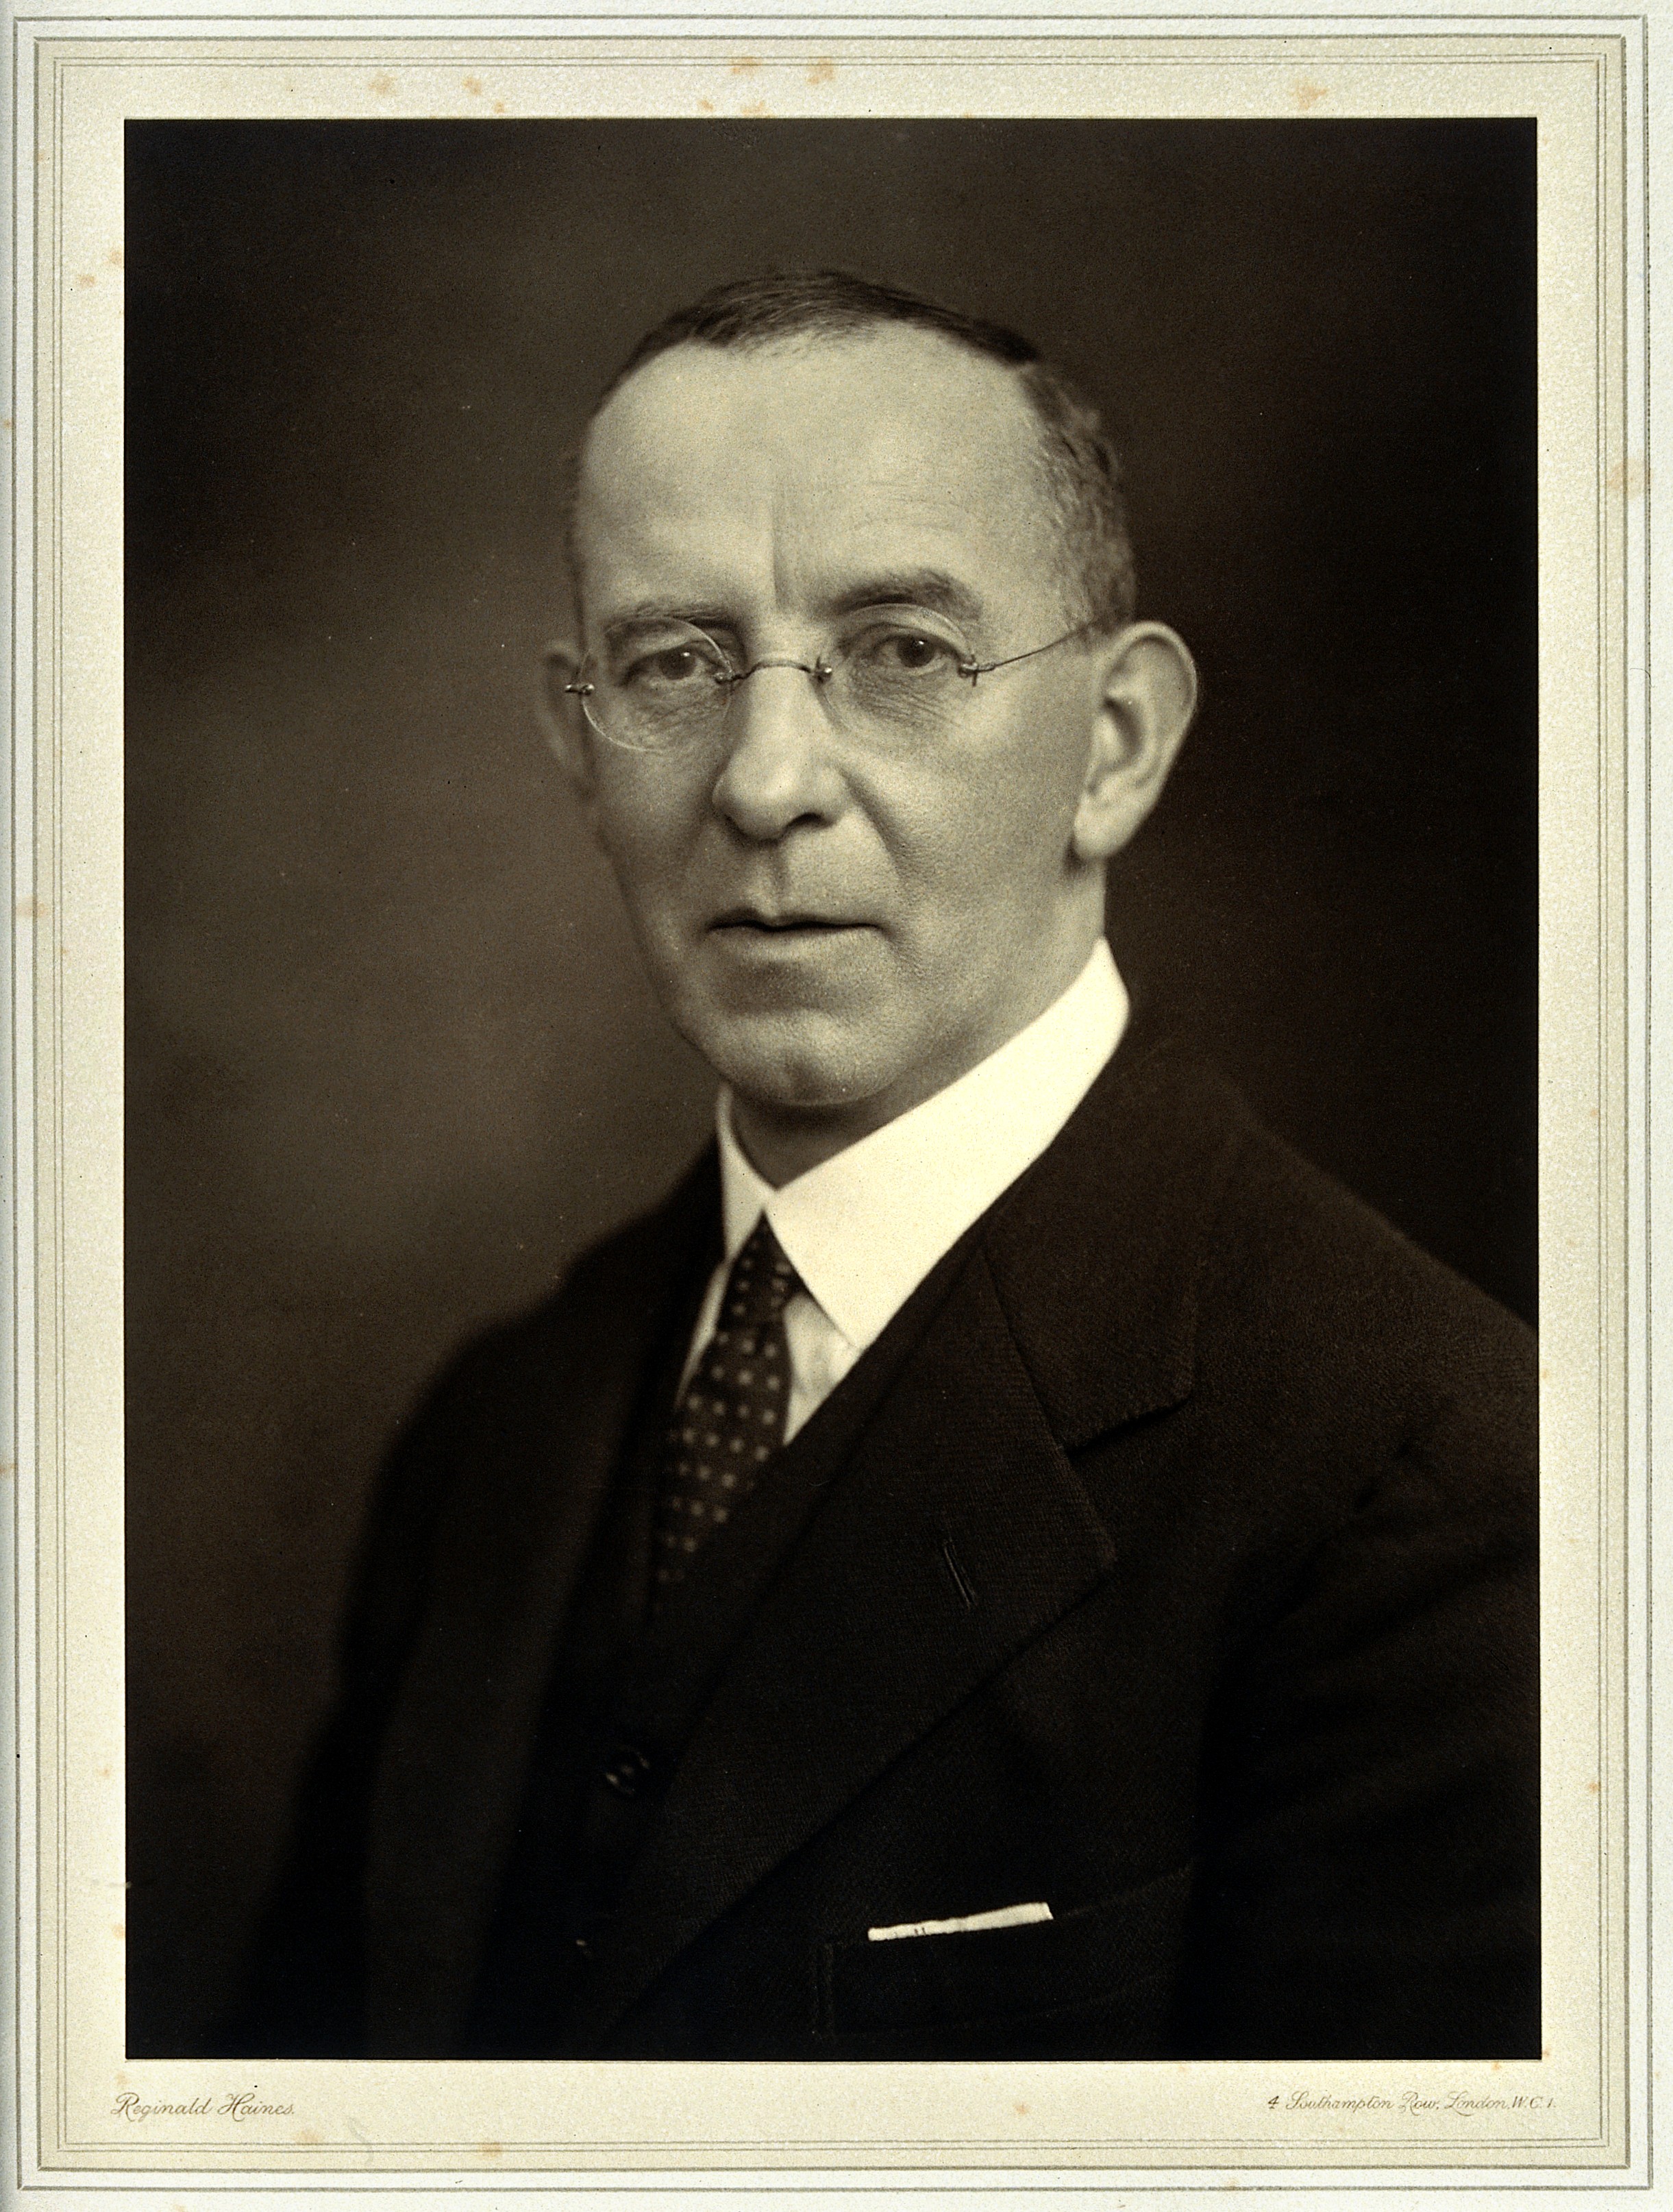 George Carmichael Low. Photograph by Reginald Haines. Wellcome V0026747